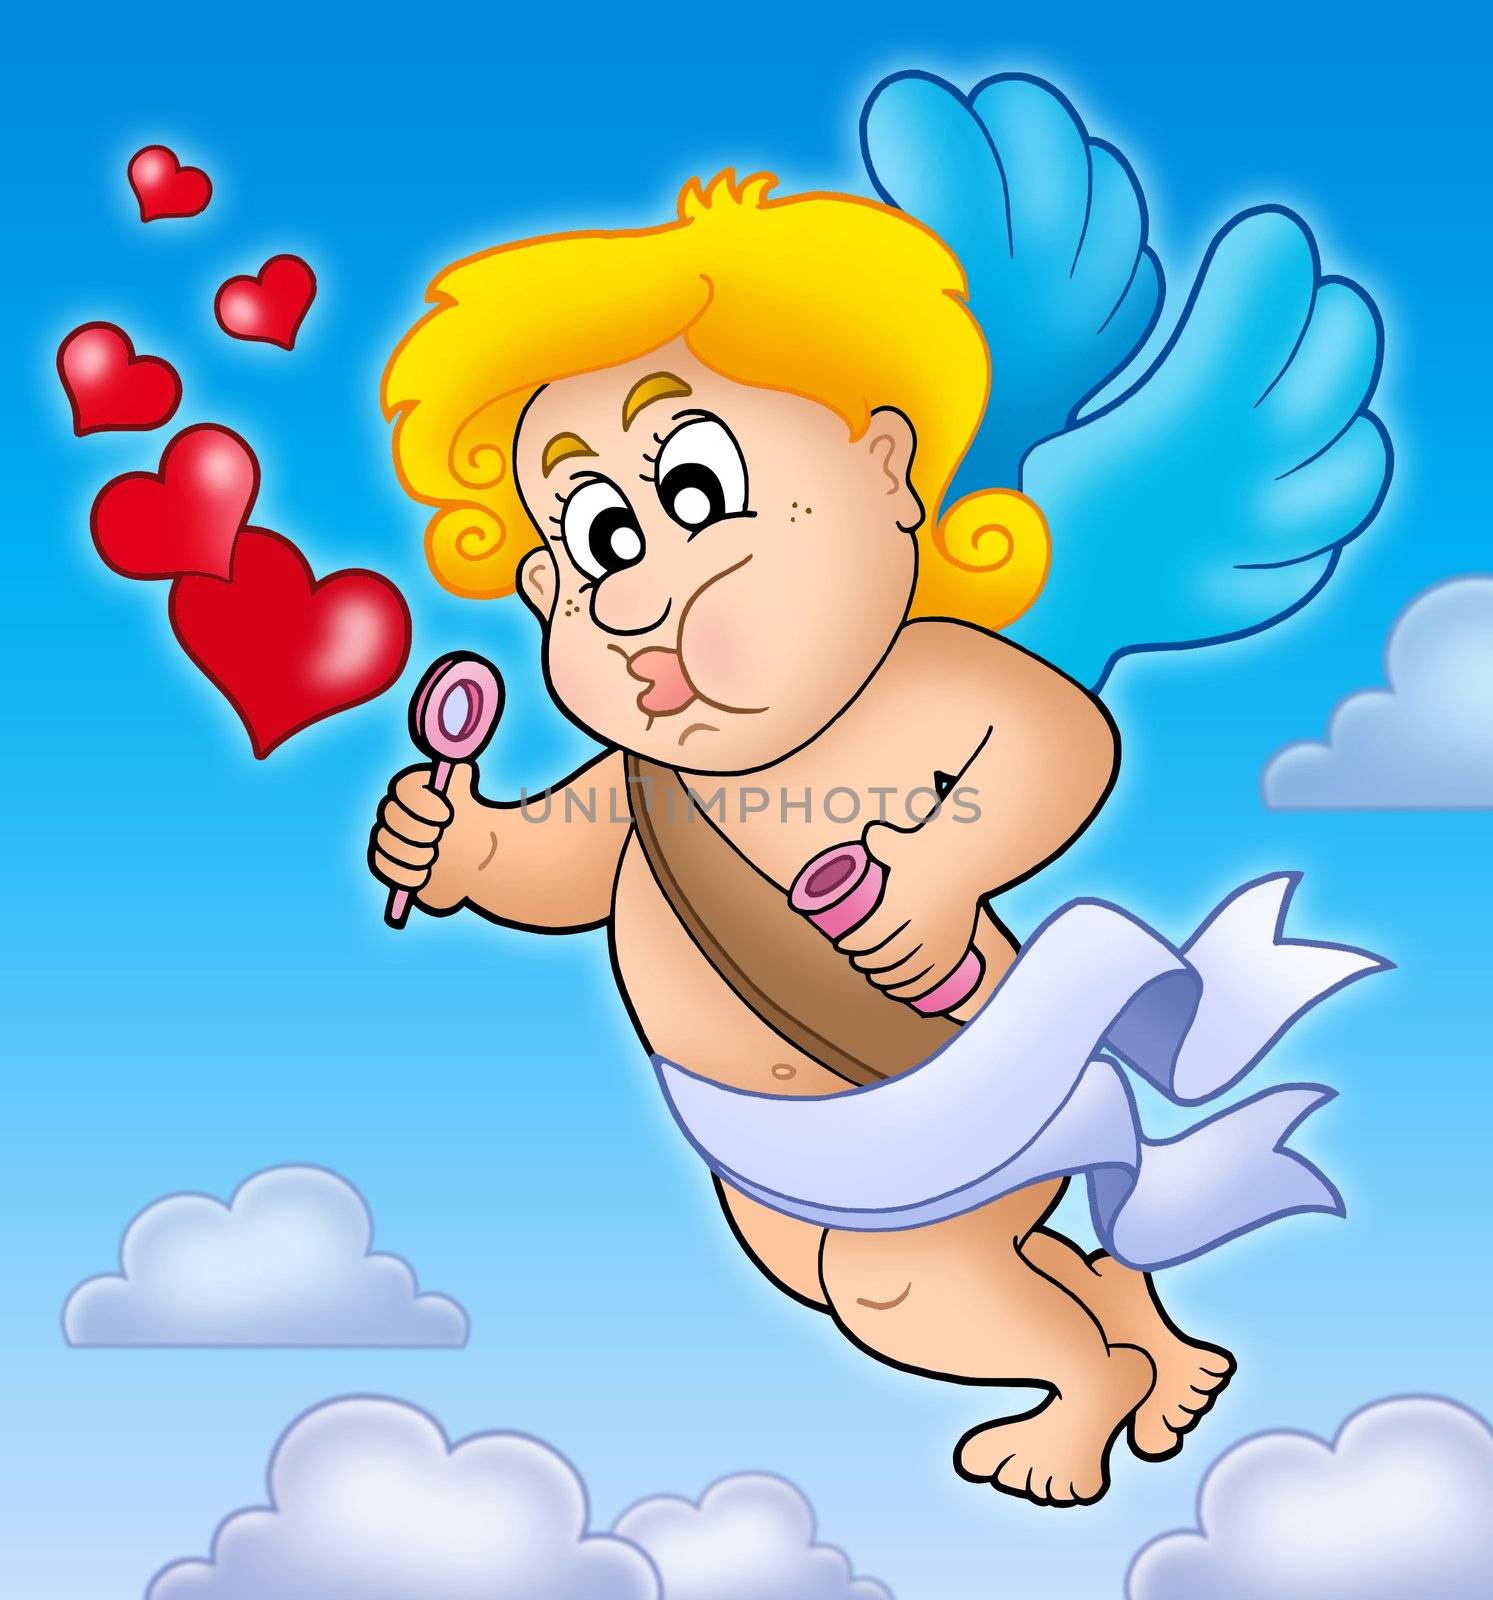 Valentine Cupid with bubble maker by clairev